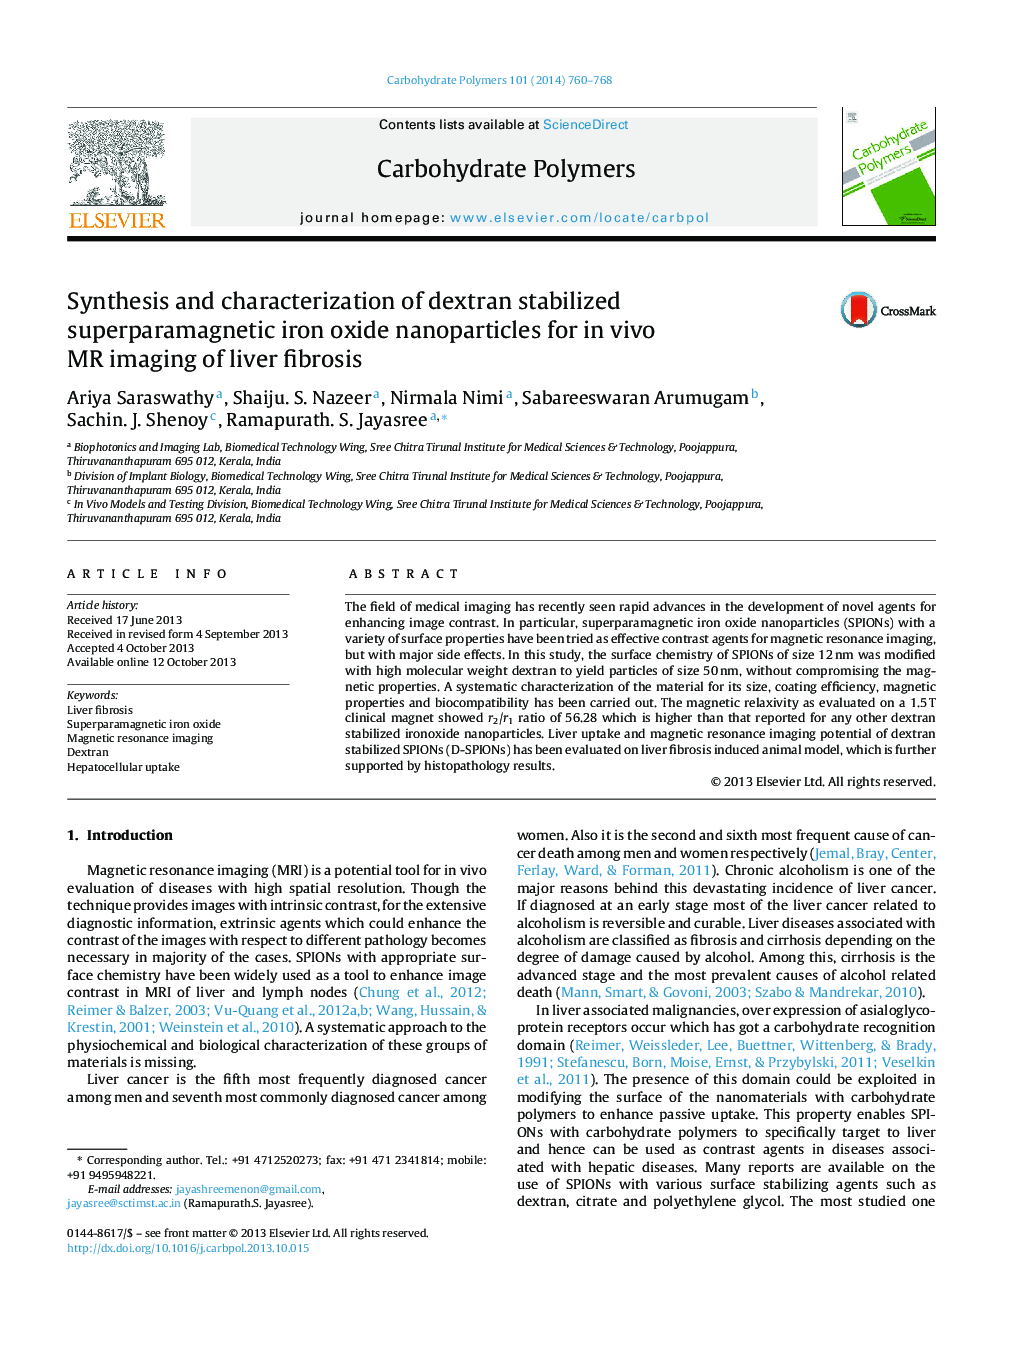 Synthesis and characterization of dextran stabilized superparamagnetic iron oxide nanoparticles for in vivo MR imaging of liver fibrosis